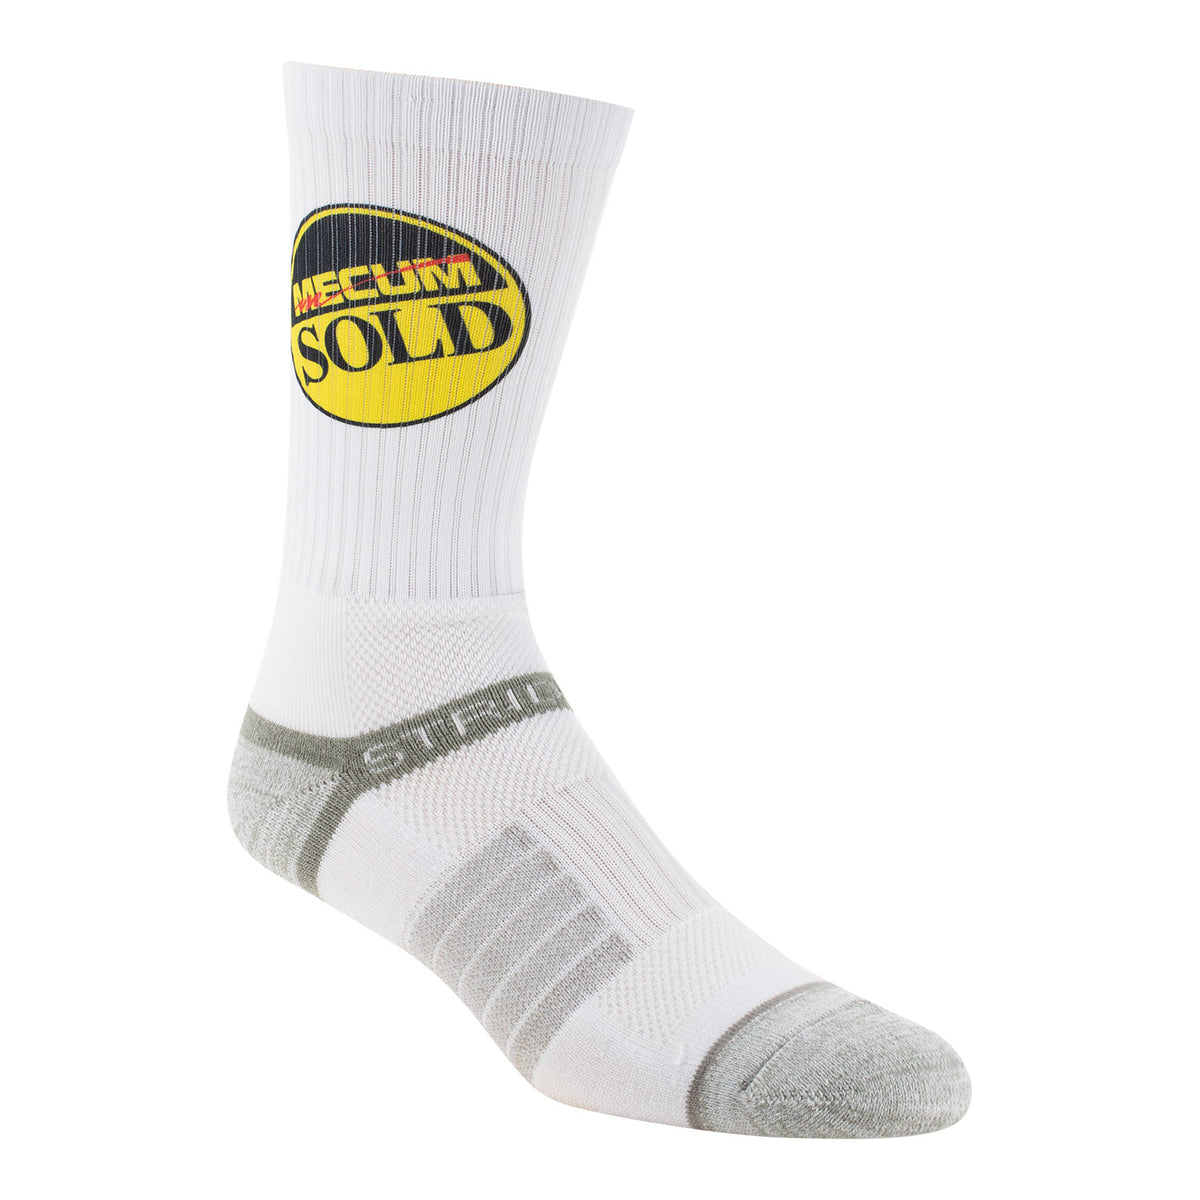 Mecum Auctions Sold Socks - Right Side View